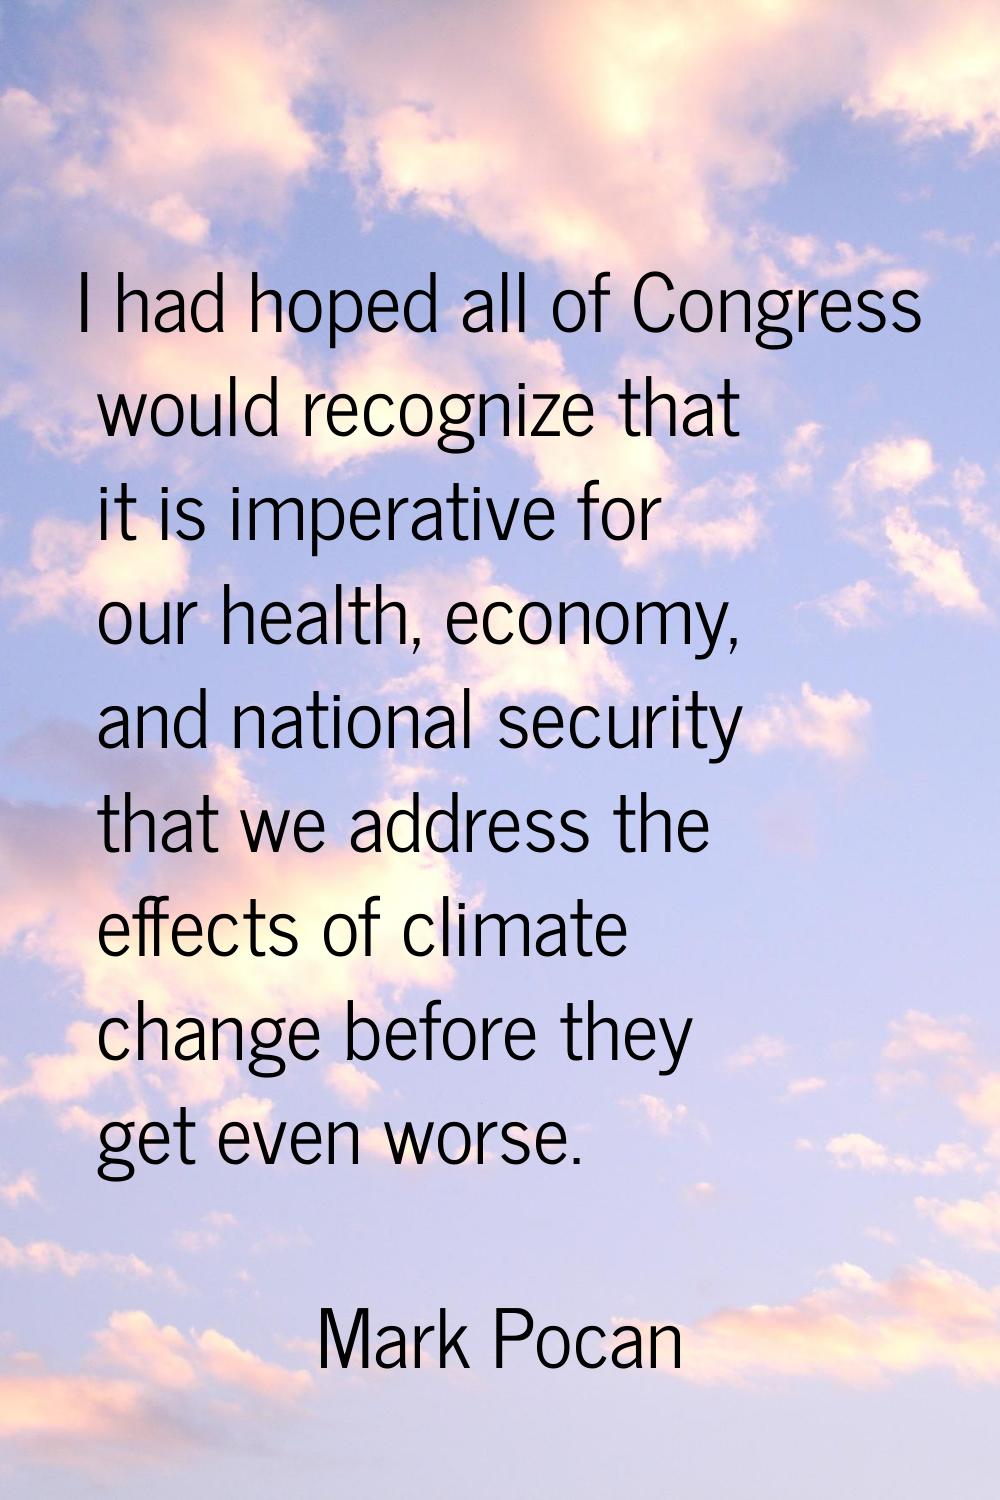 I had hoped all of Congress would recognize that it is imperative for our health, economy, and nati